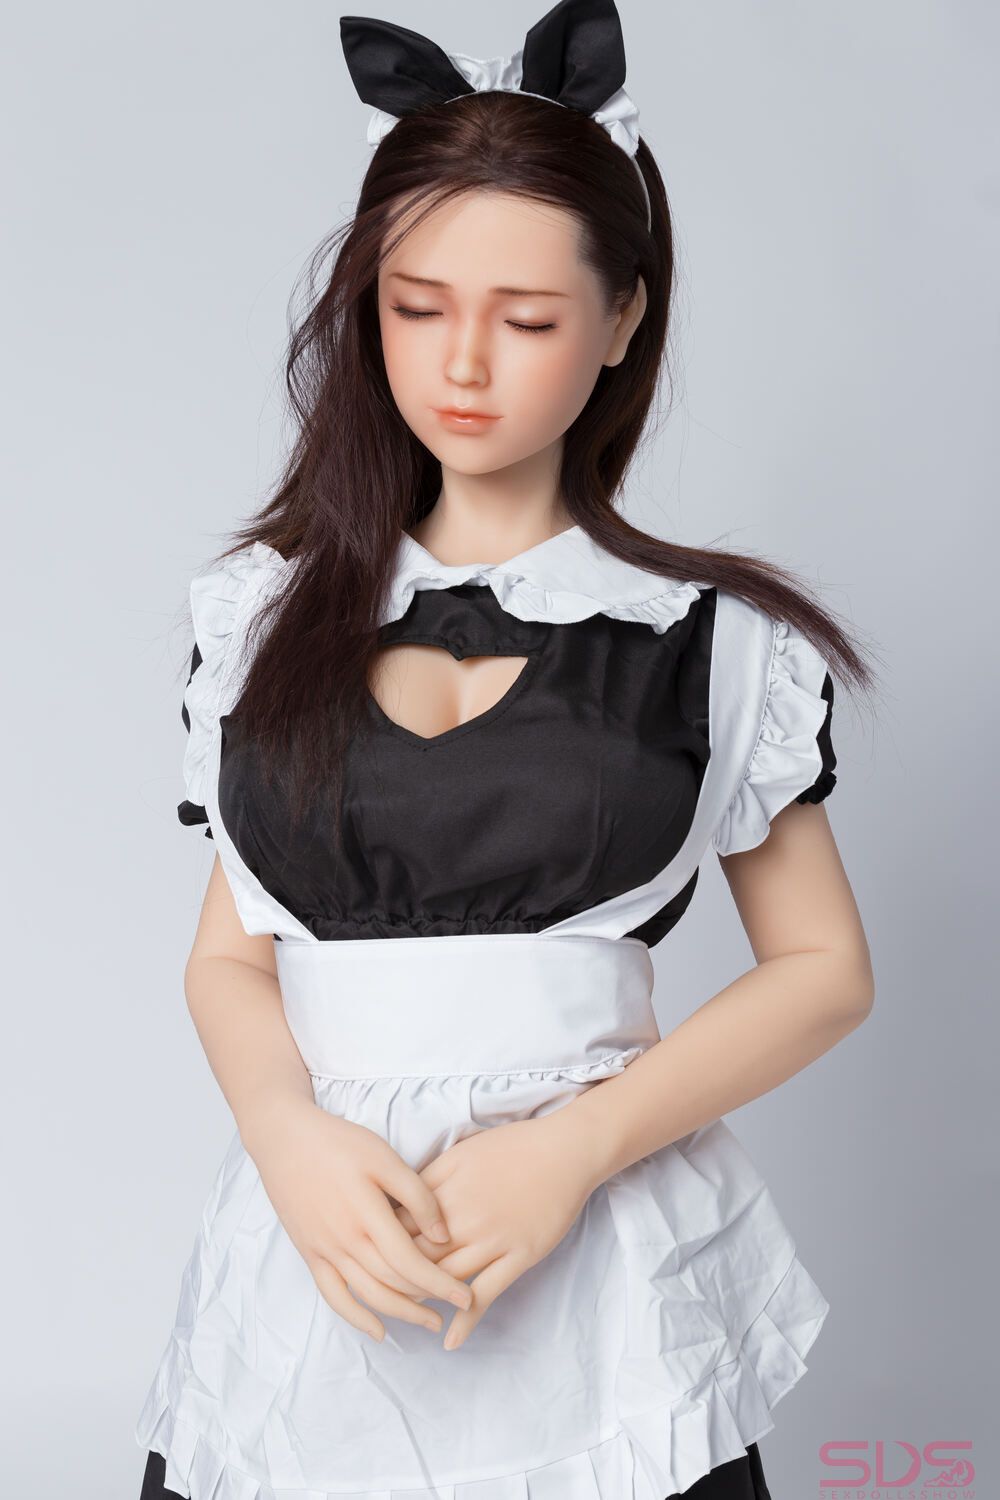 Sanhui Doll Henrietta 165cm 5ft5 G Cup Silicone Sex Doll Discover Exquisite Beauty And